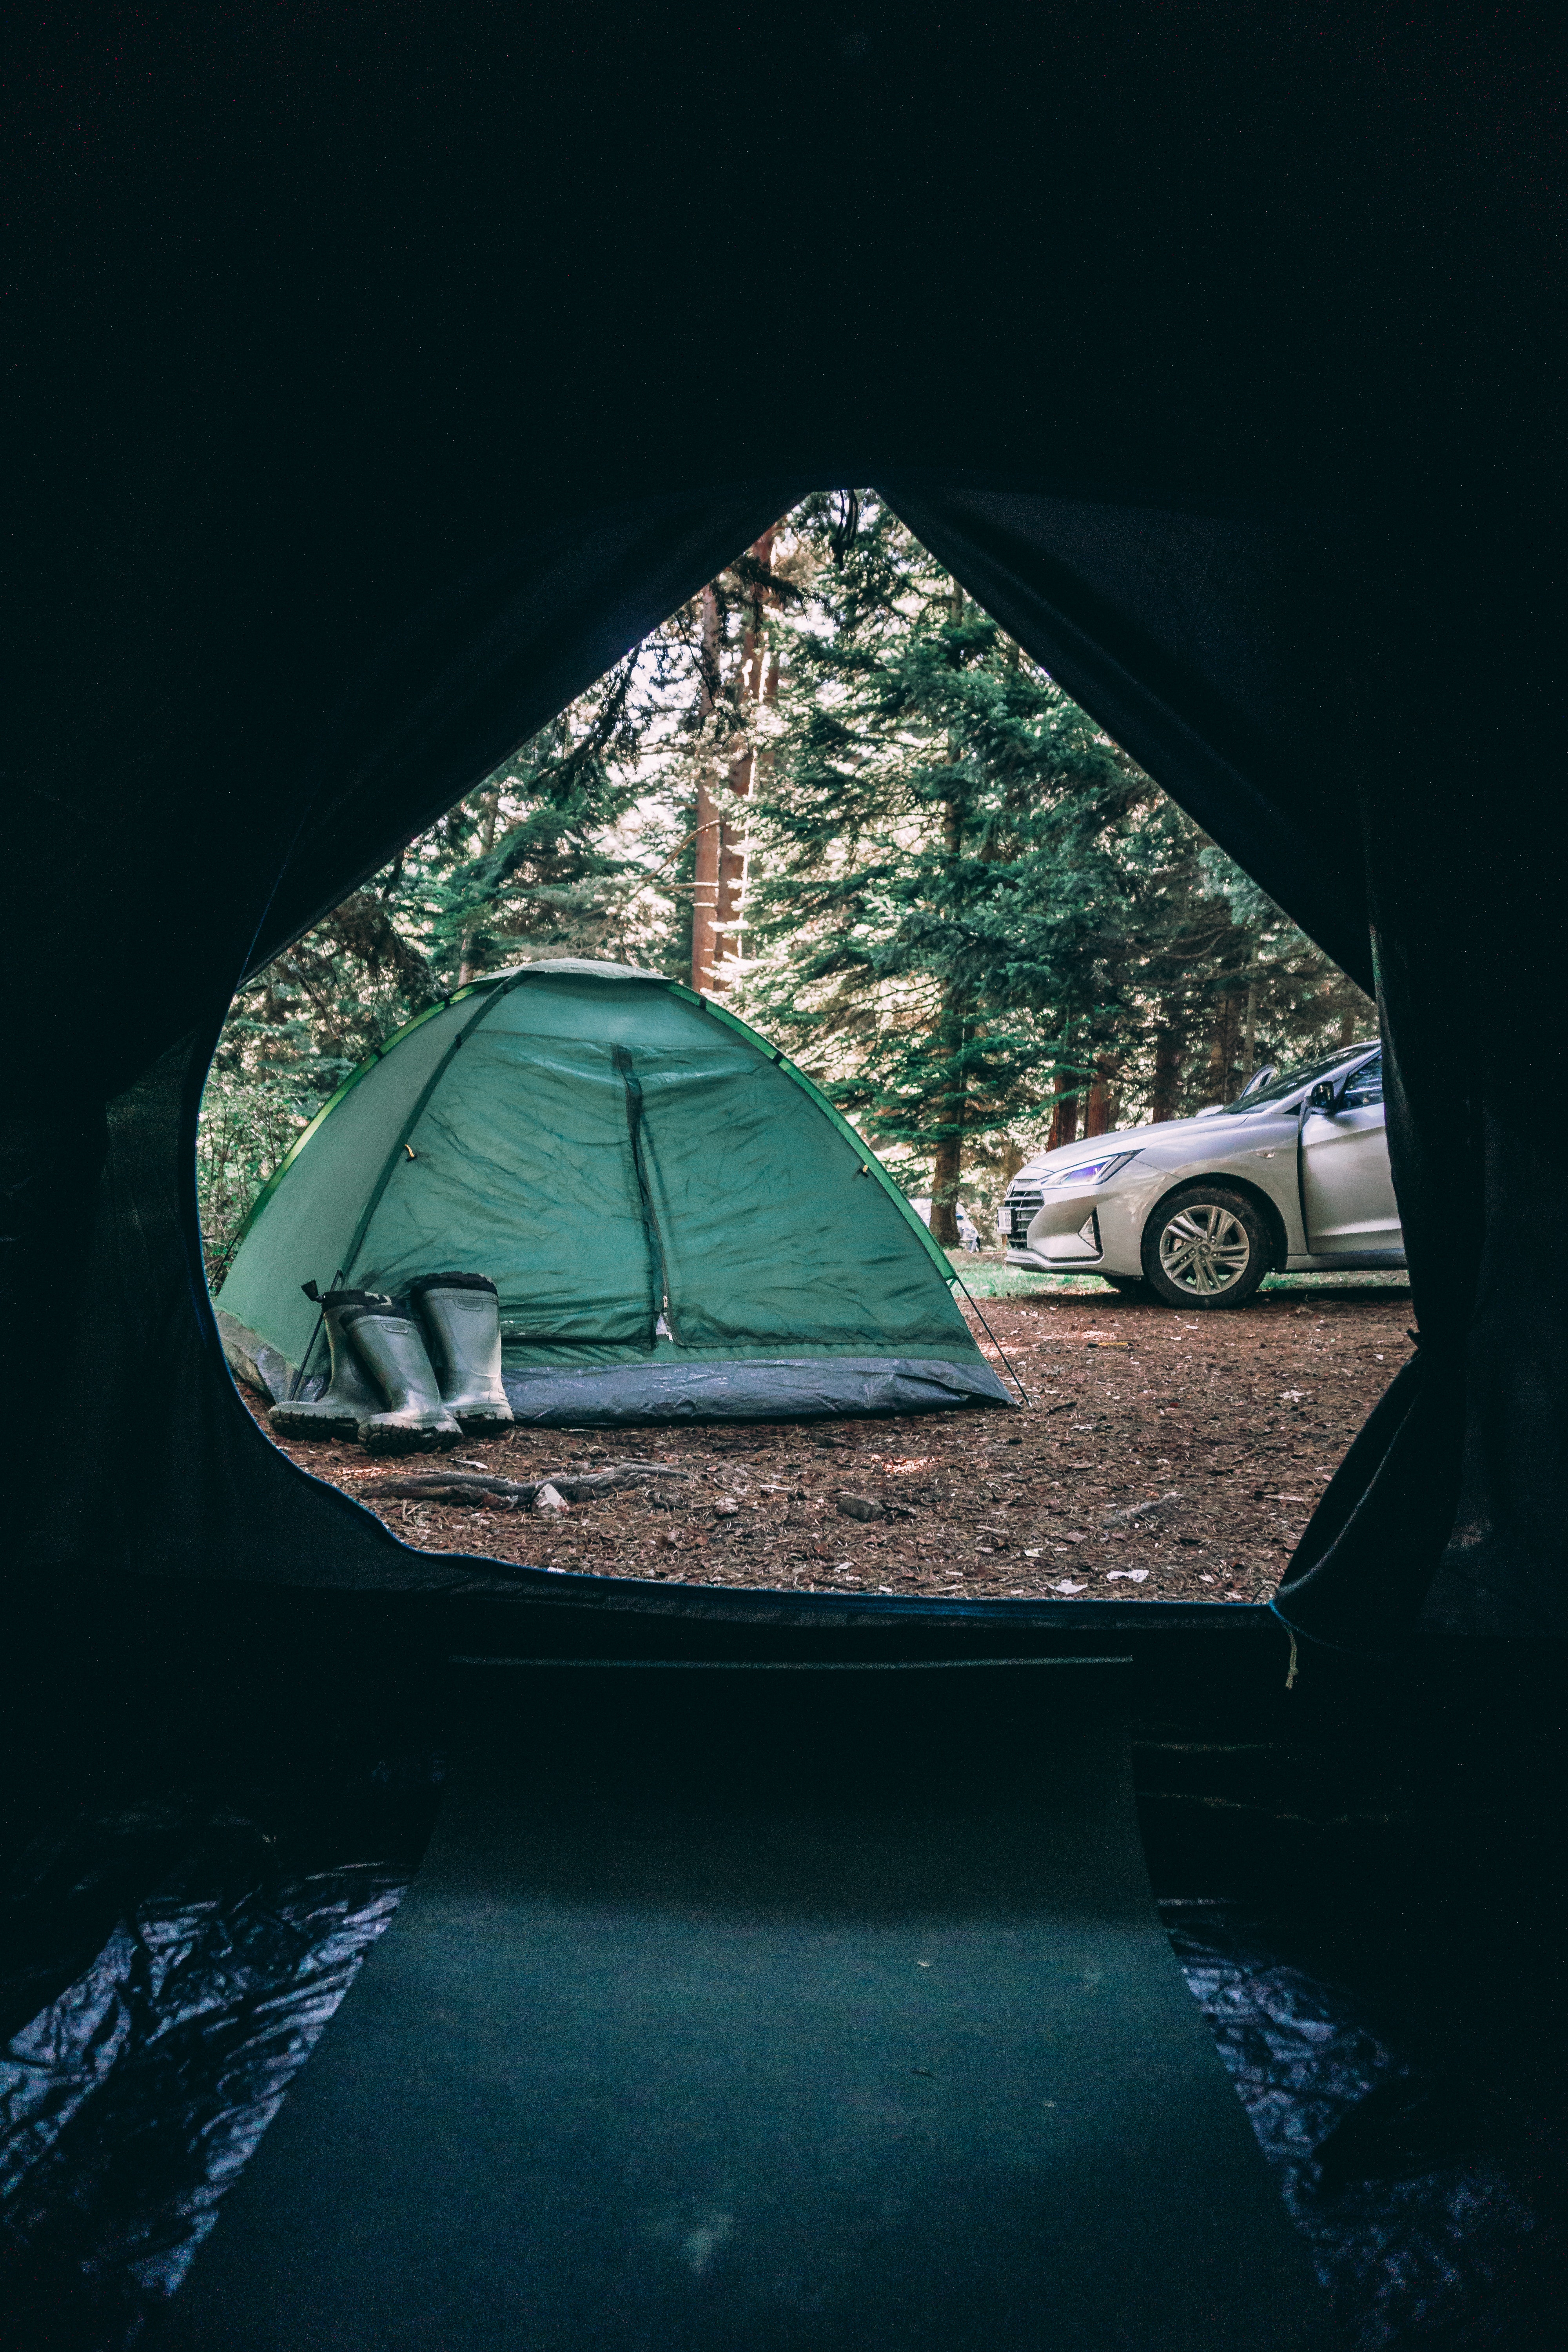 A tent in the woods, seen through the opening of a tent. - Camping